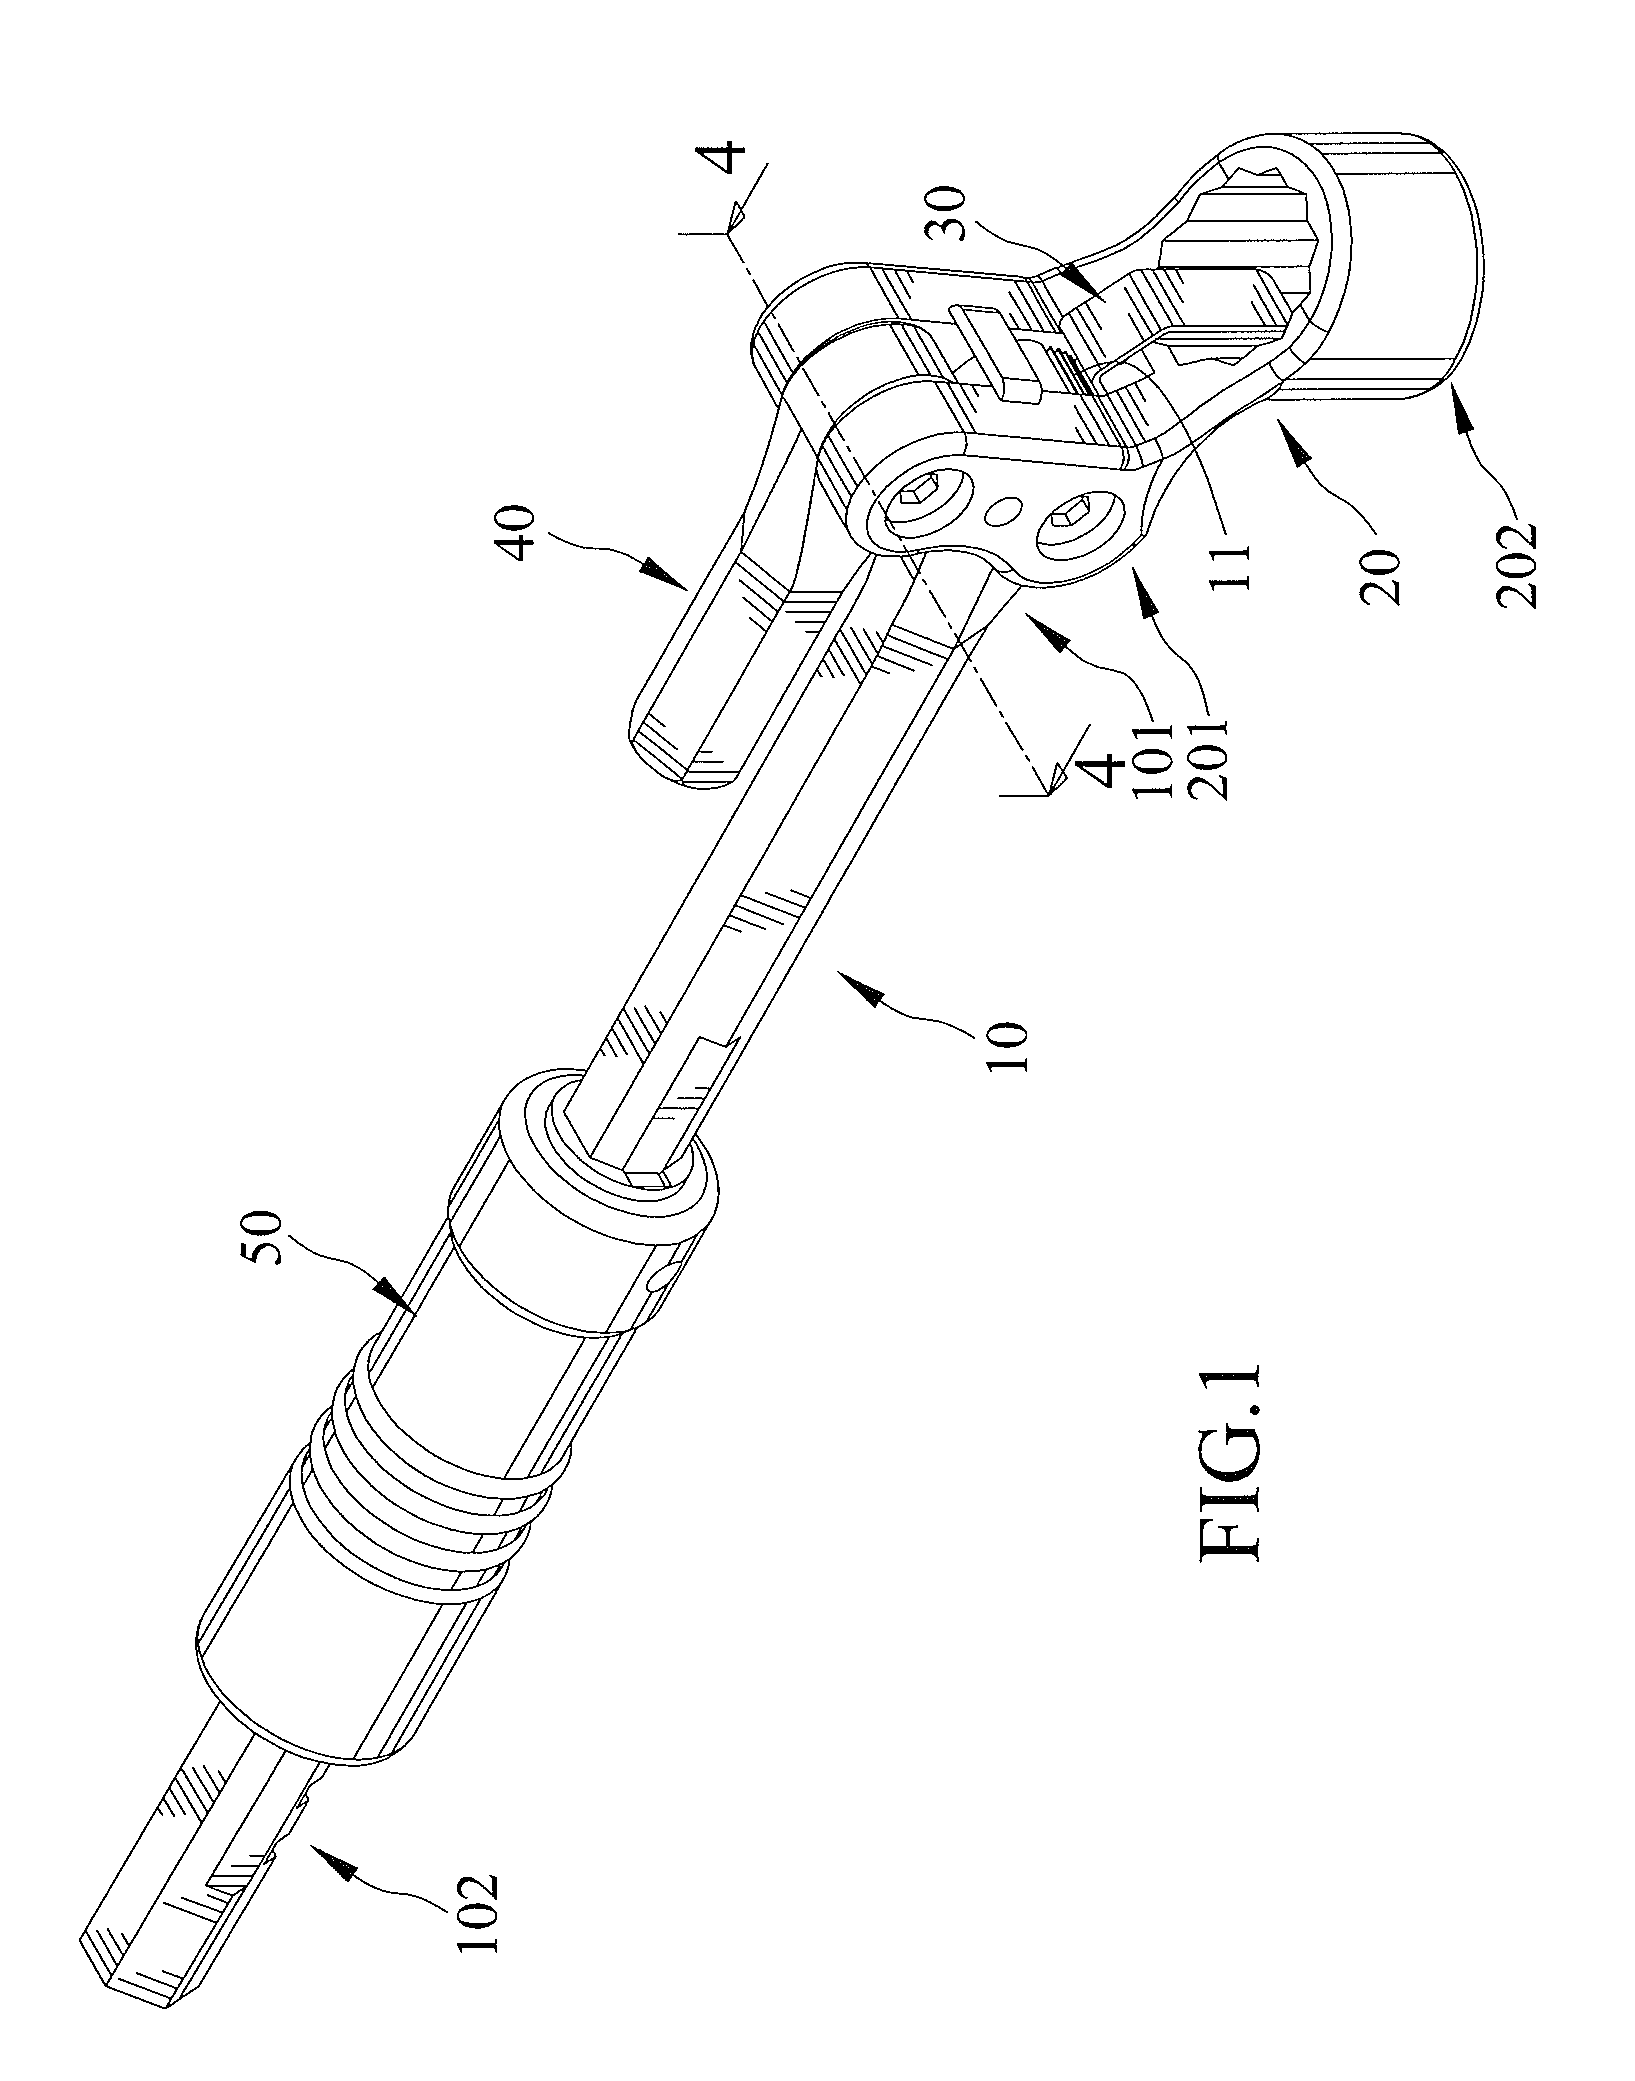 Tool with working heads and positioning unit